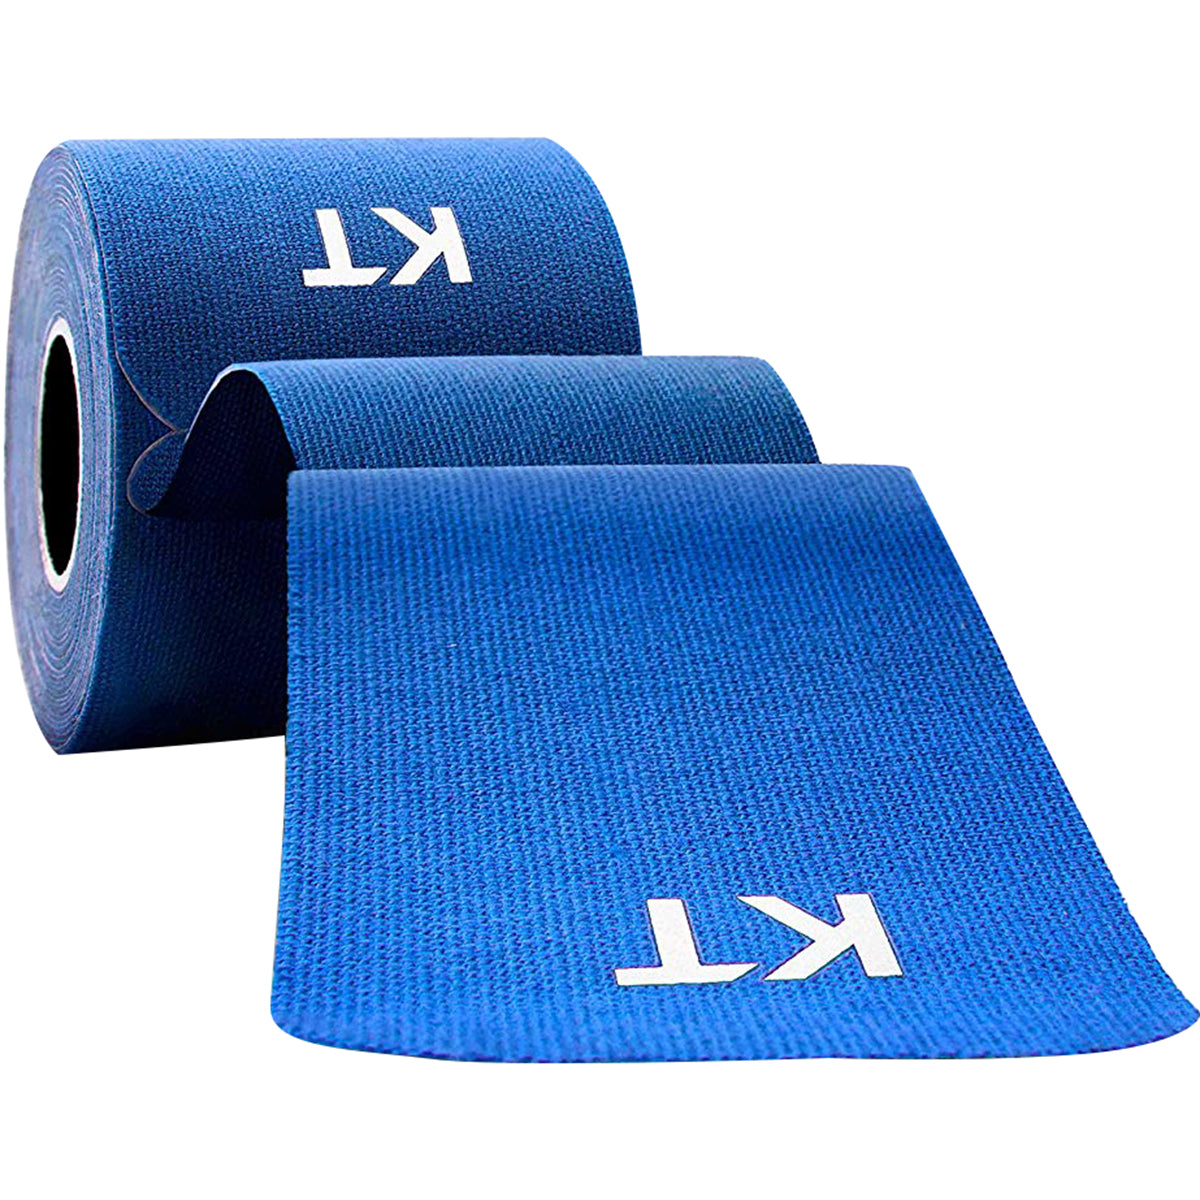 KT Tape Cotton 10" Precut Kinesiology Therapeutic Sports Roll, 20 Strips, Blue KT Tape